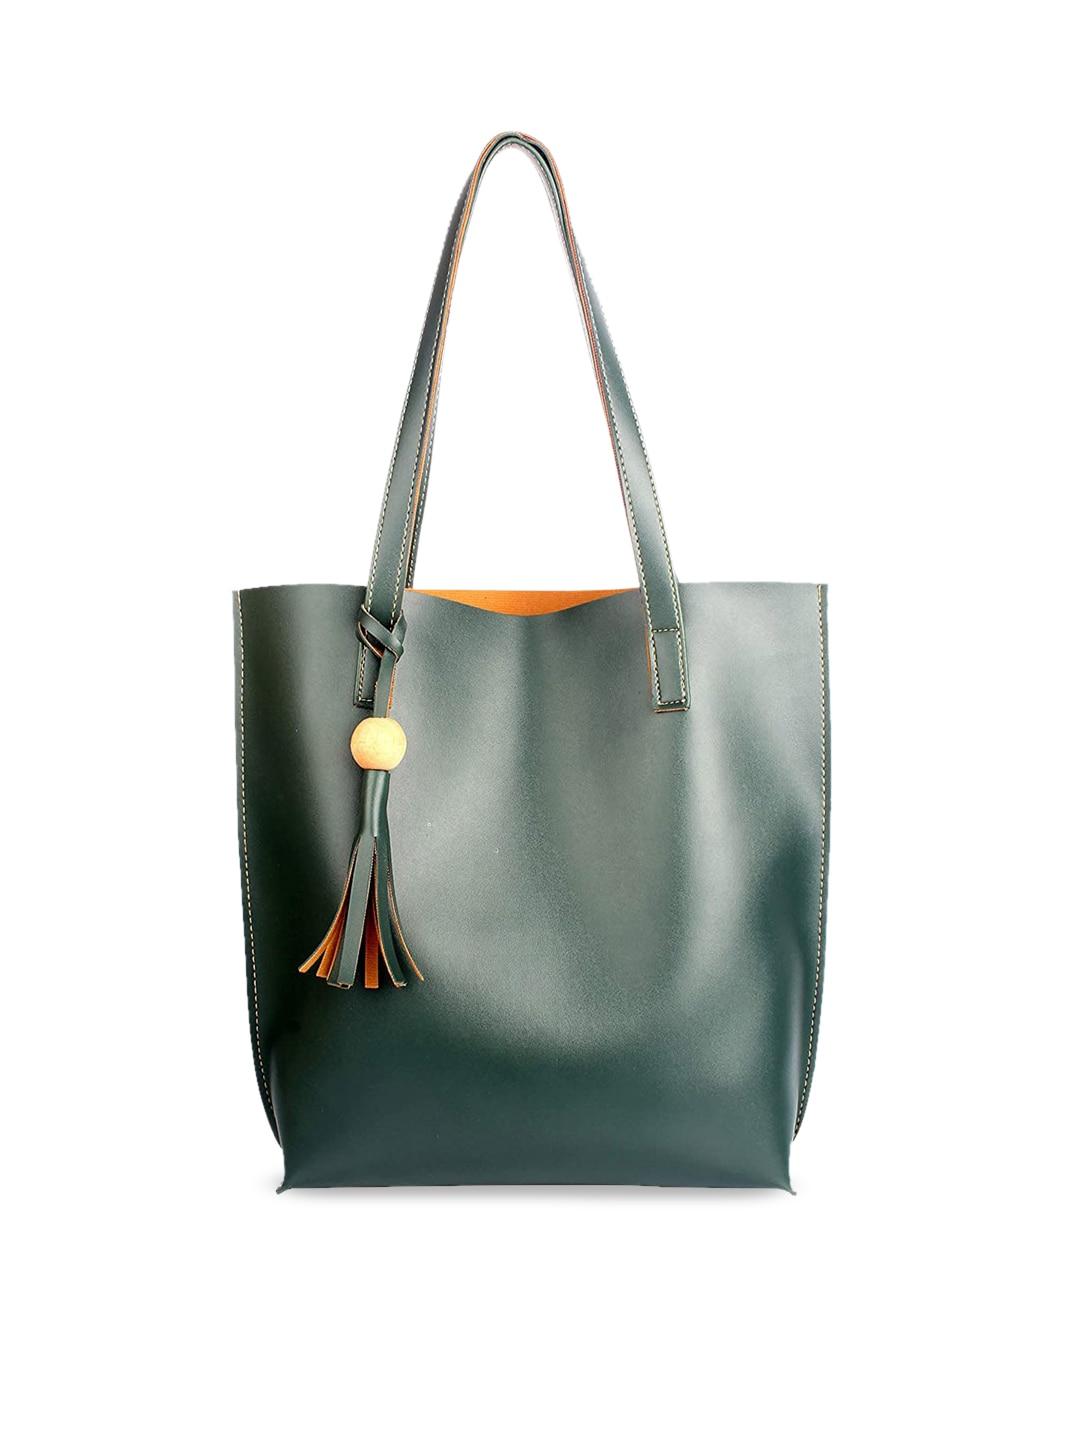 Style SHOES Green PU Shopper Tote Bag with Tasselled